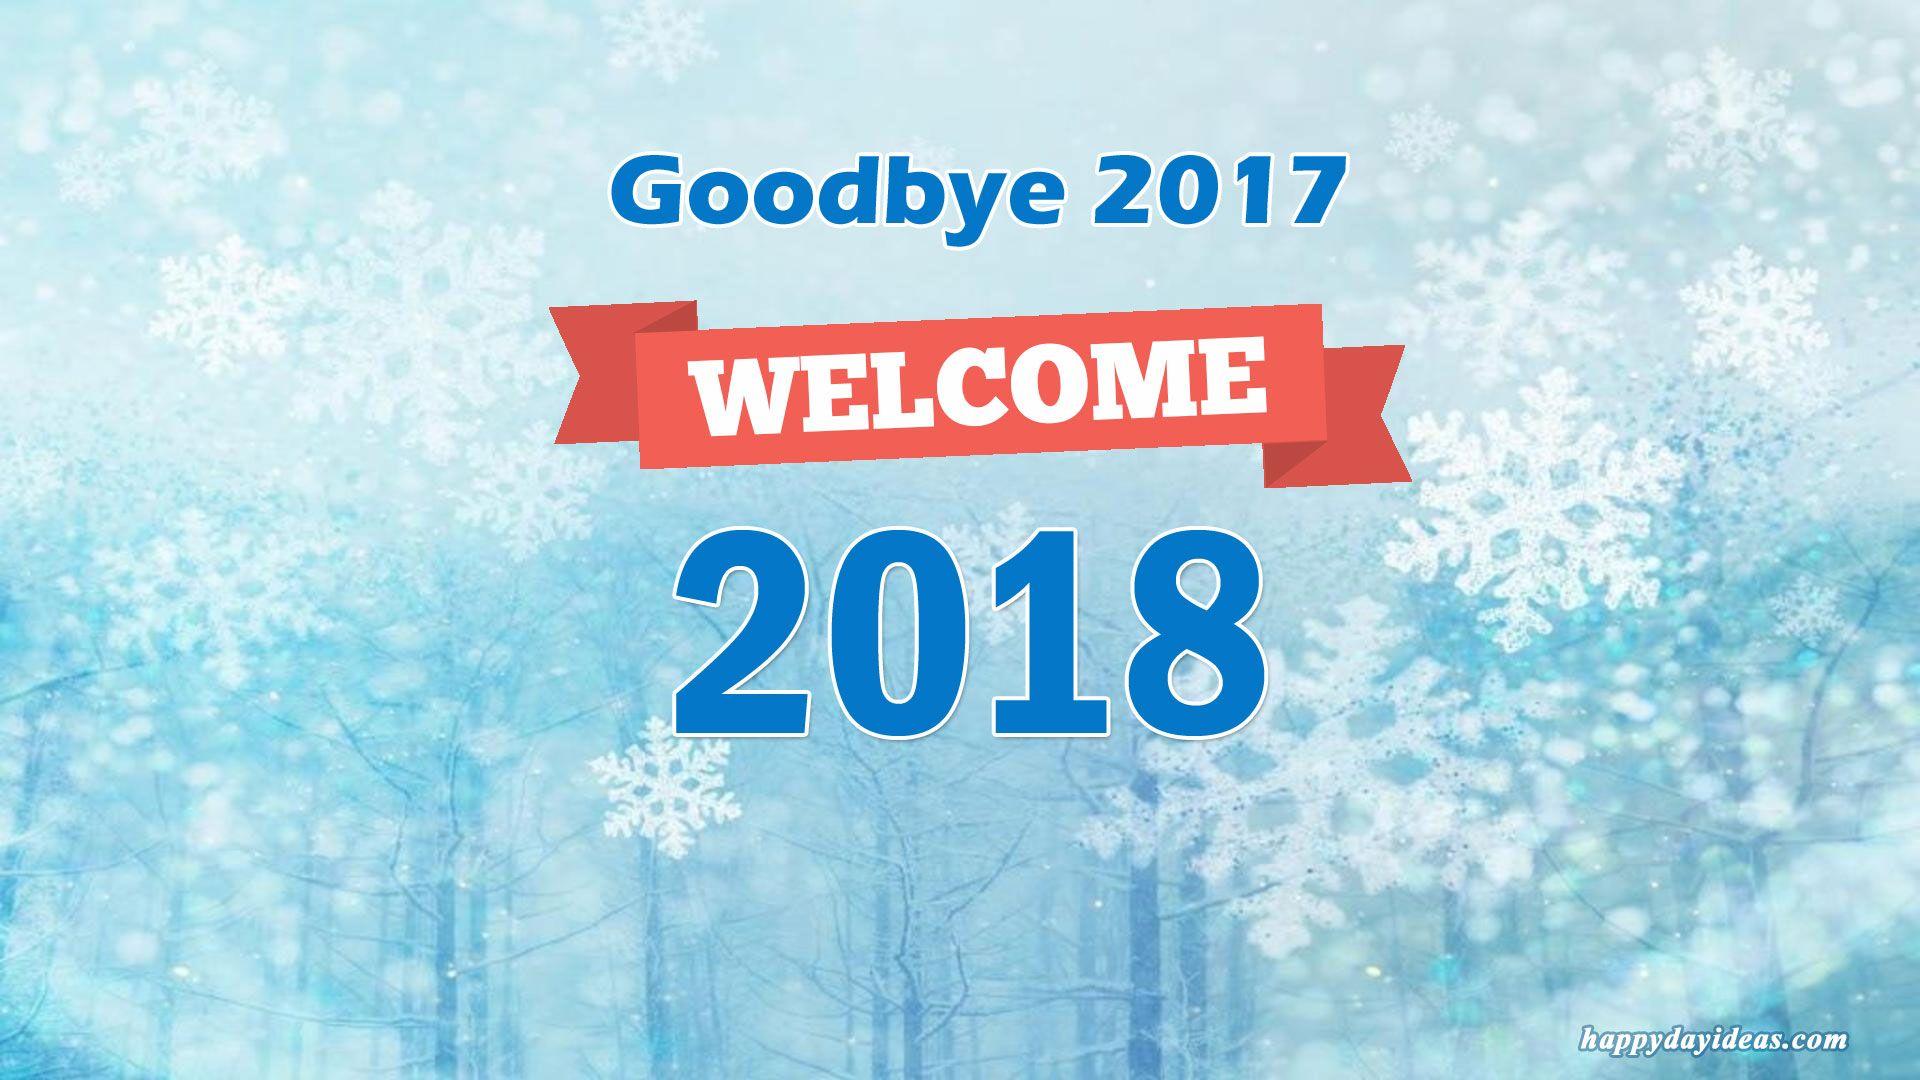 Welcome 2018 Wallpapers - Wallpaper Cave